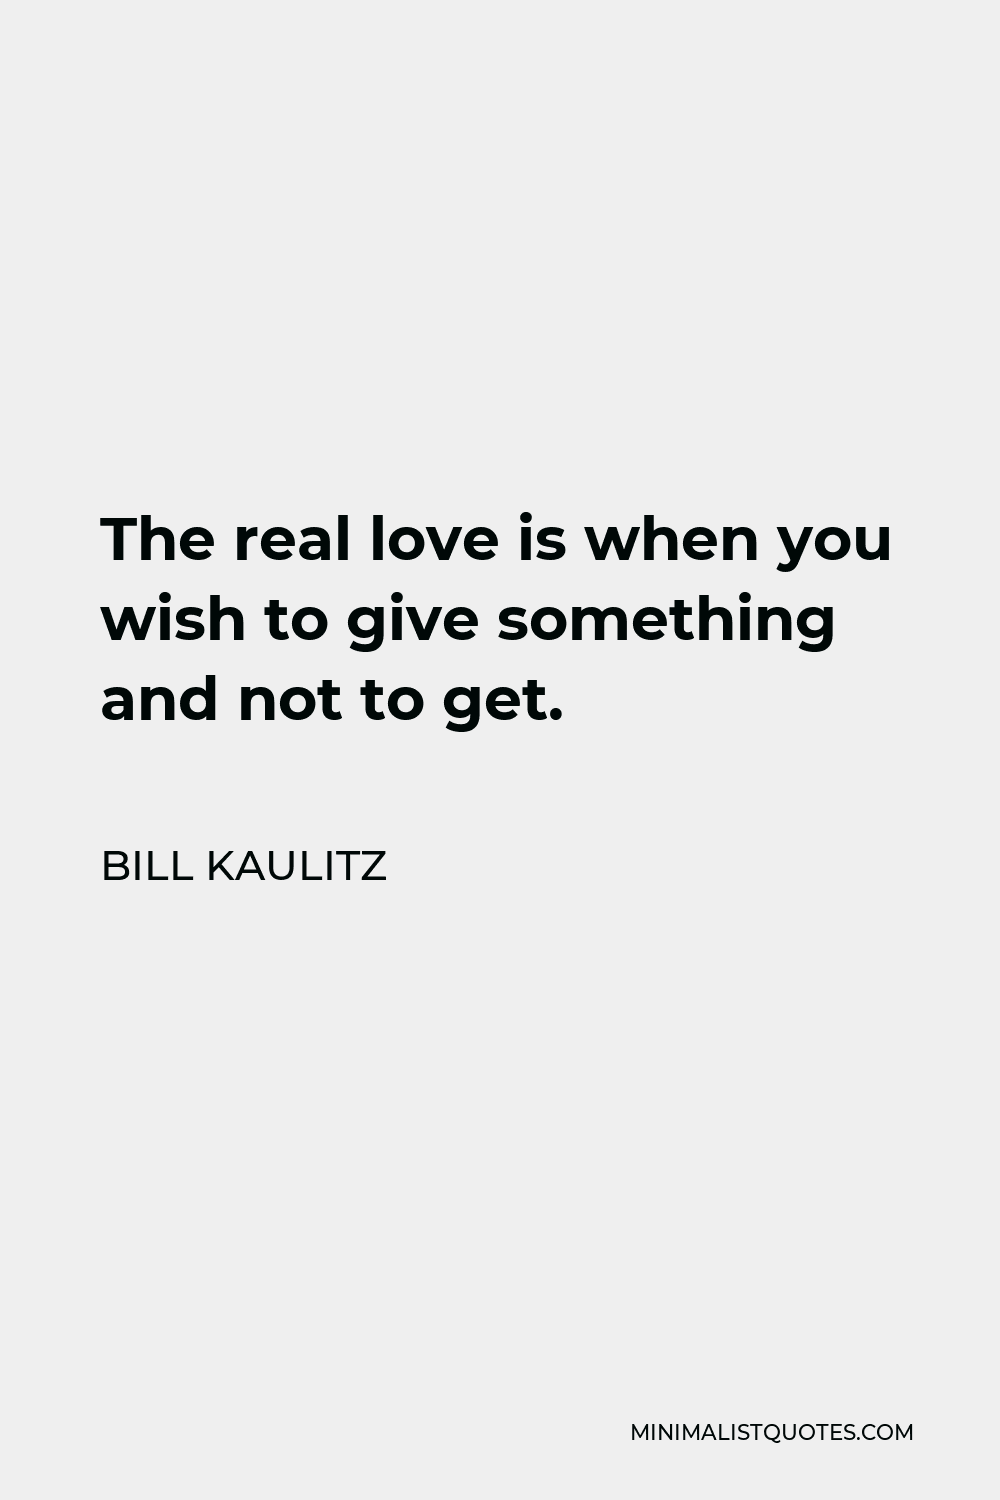 Bill Kaulitz Quote - The real love is when you wish to give something and not to get.